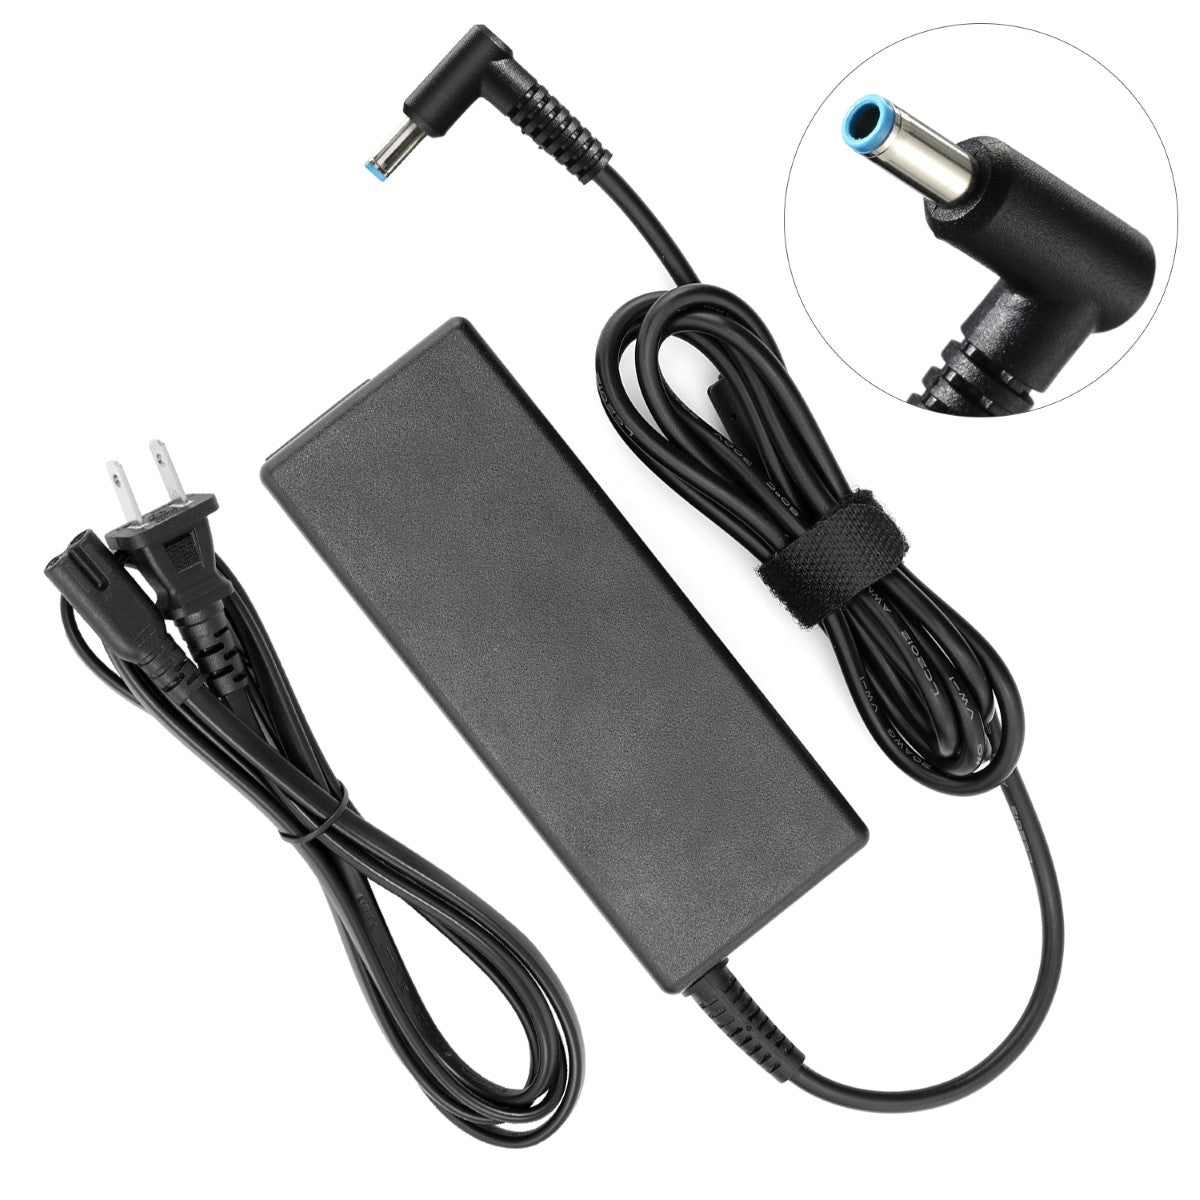 Charger for HP 340 G1 F7V09UT#ABA Notebook